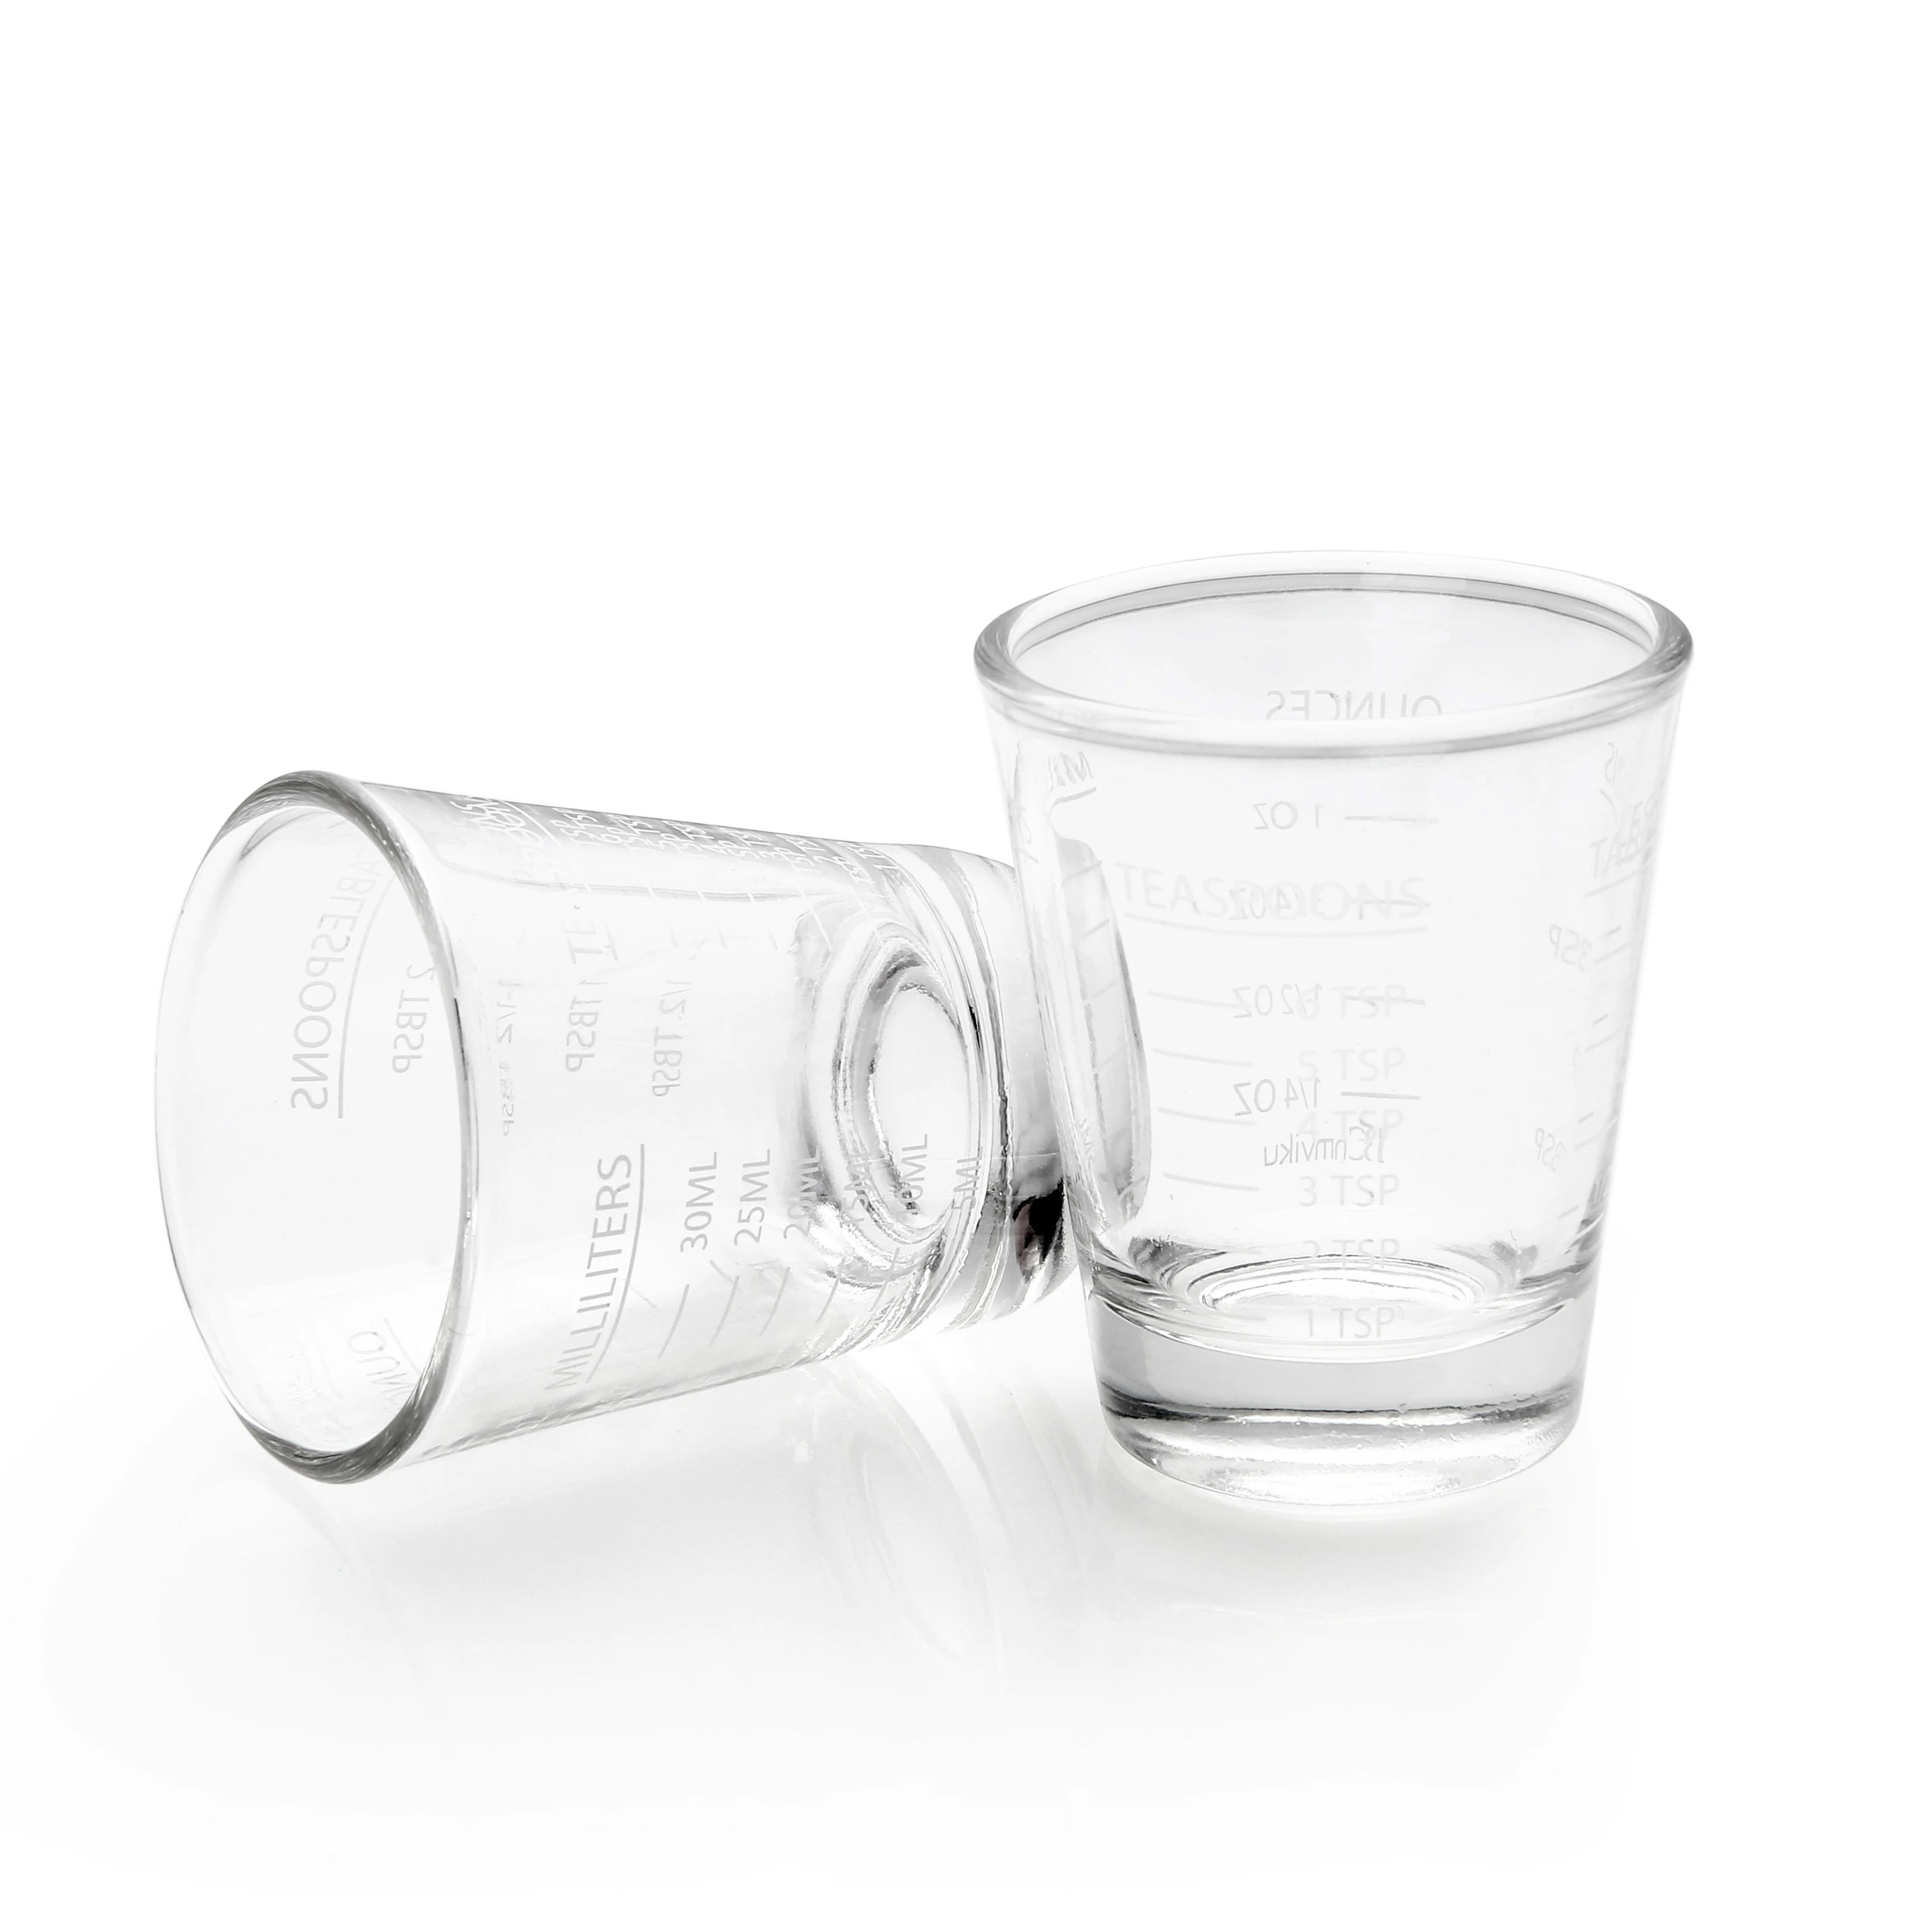 

BCnmviku 2Pack Espresso Shot Glasses Coffee Cup 2Oz Ounce Glass Measuring Cup Bar Cocktail Graduated Cups for Bartender Kitchen, Transparent clear